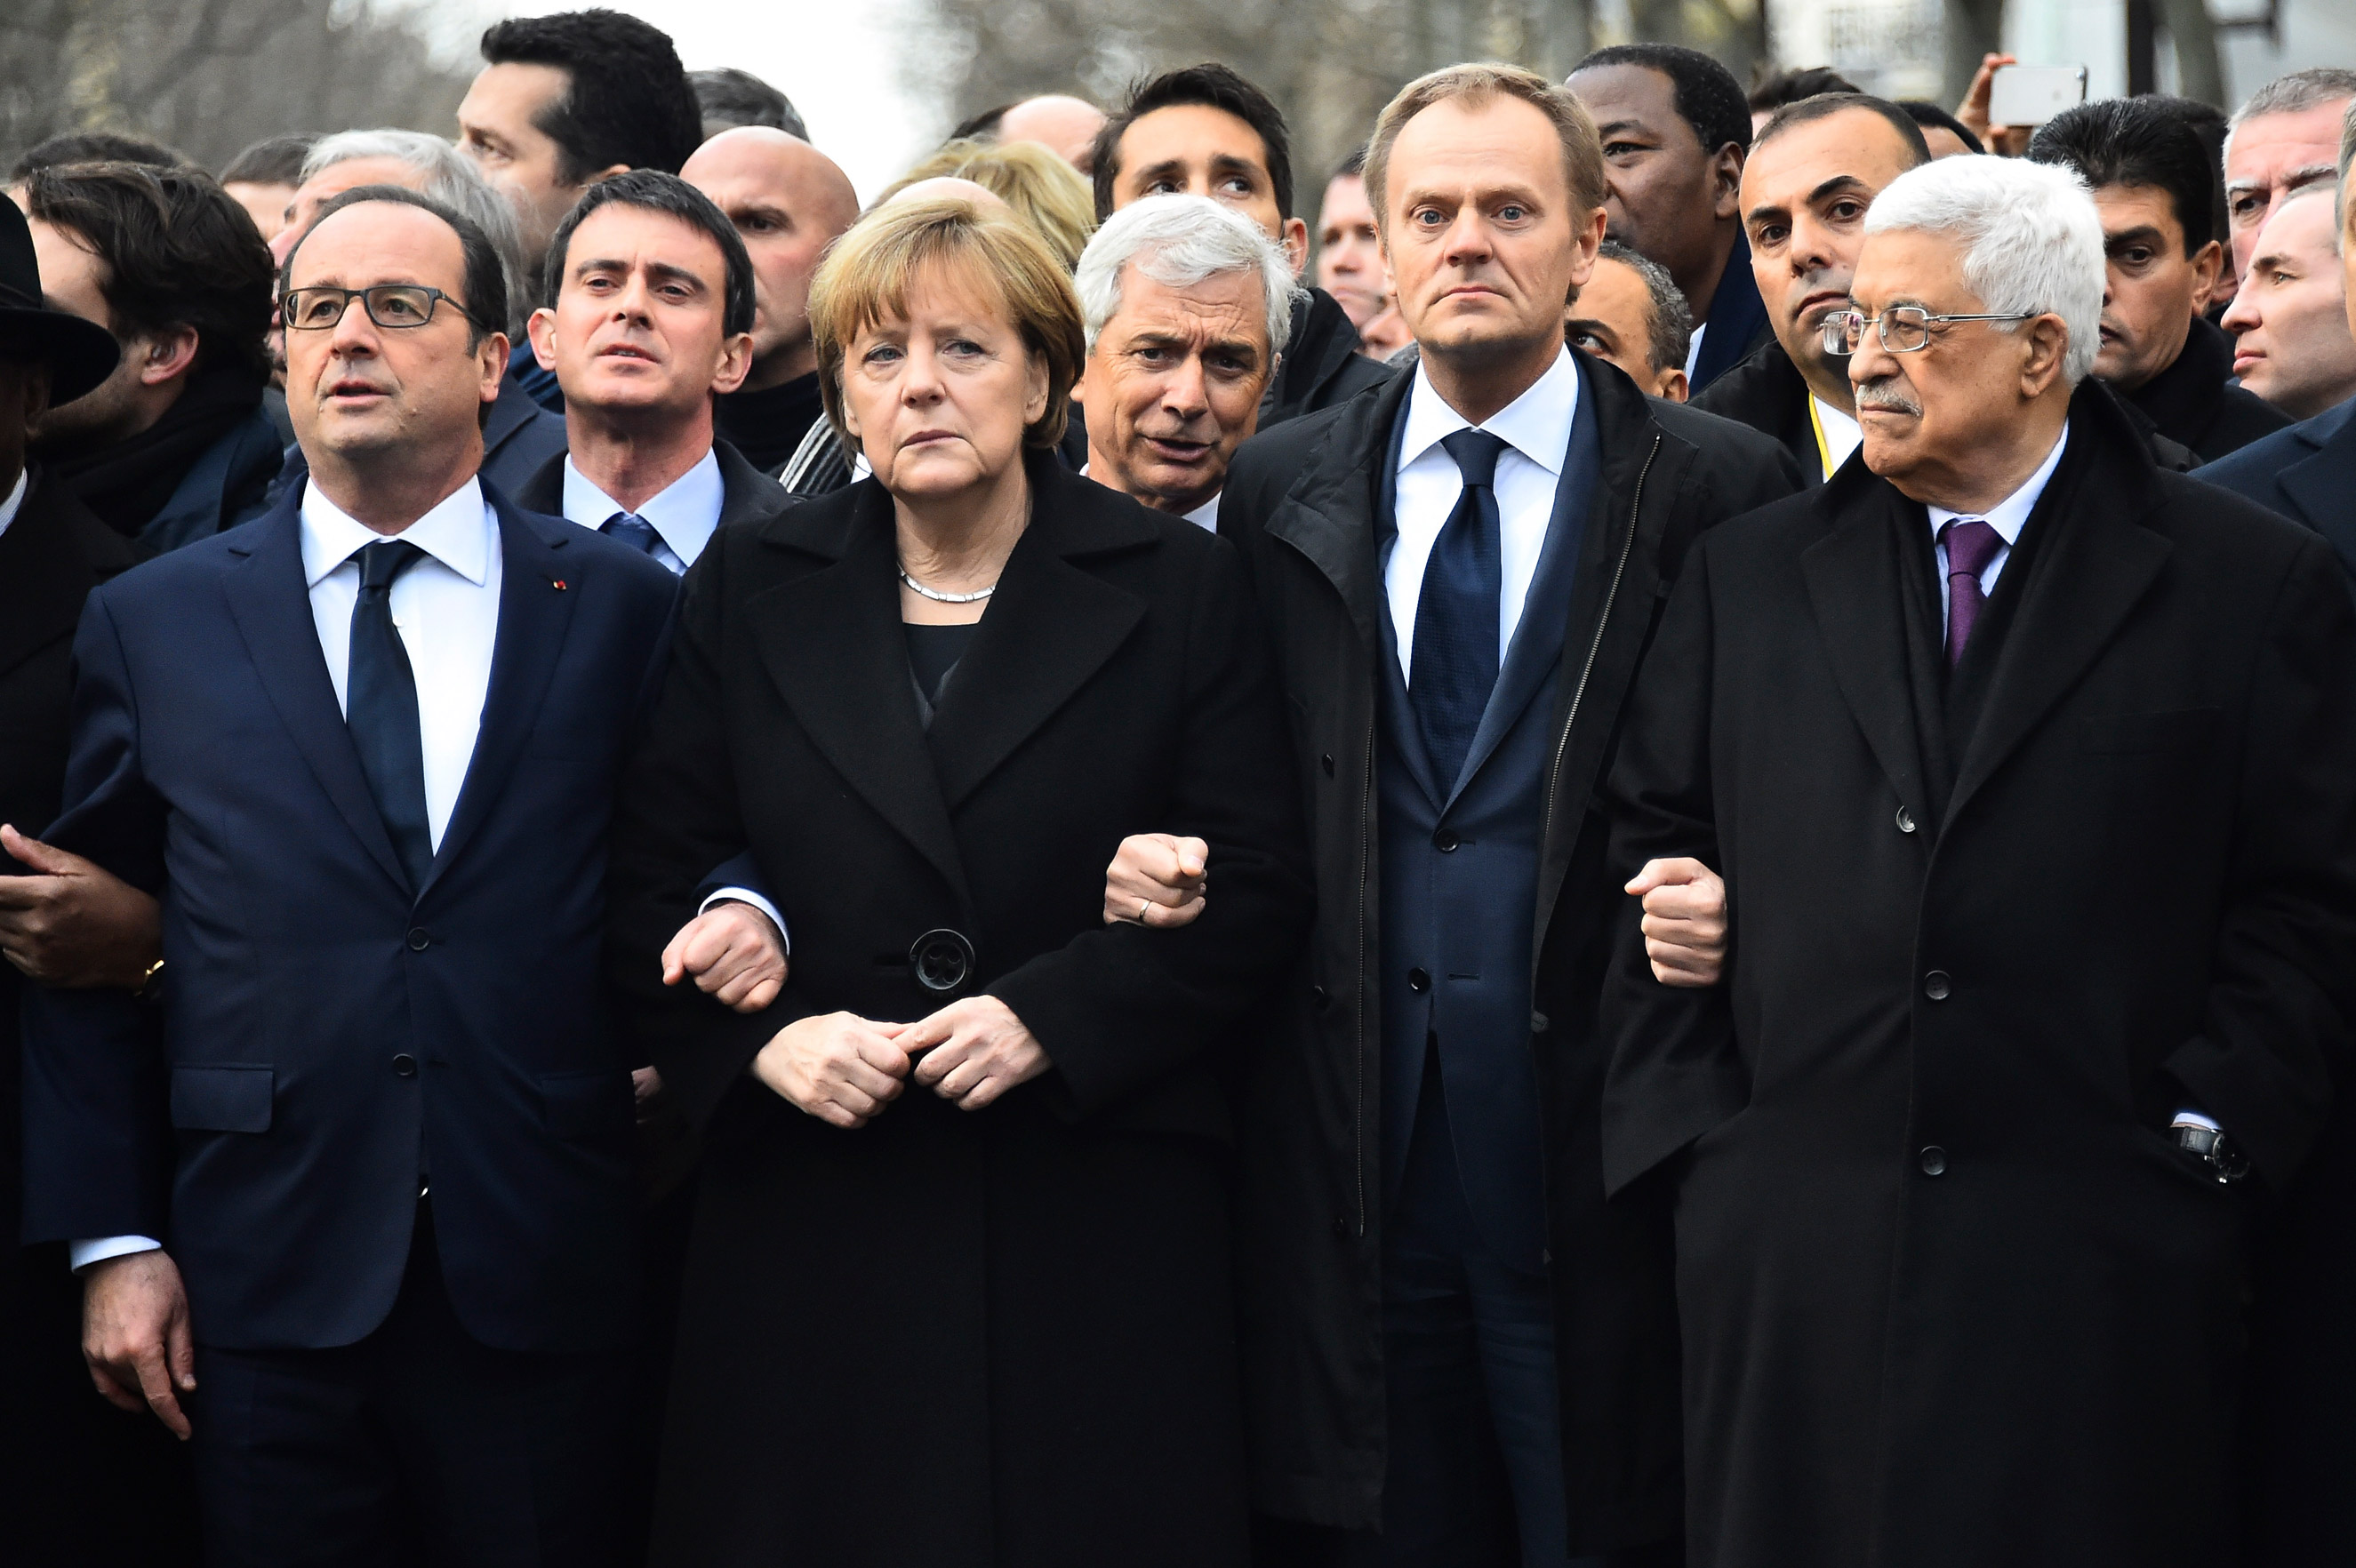 From left: French President Francois Hollande, Chancellor Angela Merkel, President of the European Council Donald Tusk, Palestinian Authority President Mahmoud Abbas during a silent march against terrorism in Paris on Jan. 11, 2015 following the terrorist attacks on the French satirical weekly Charlie Hebdo and a kosher supermarket.